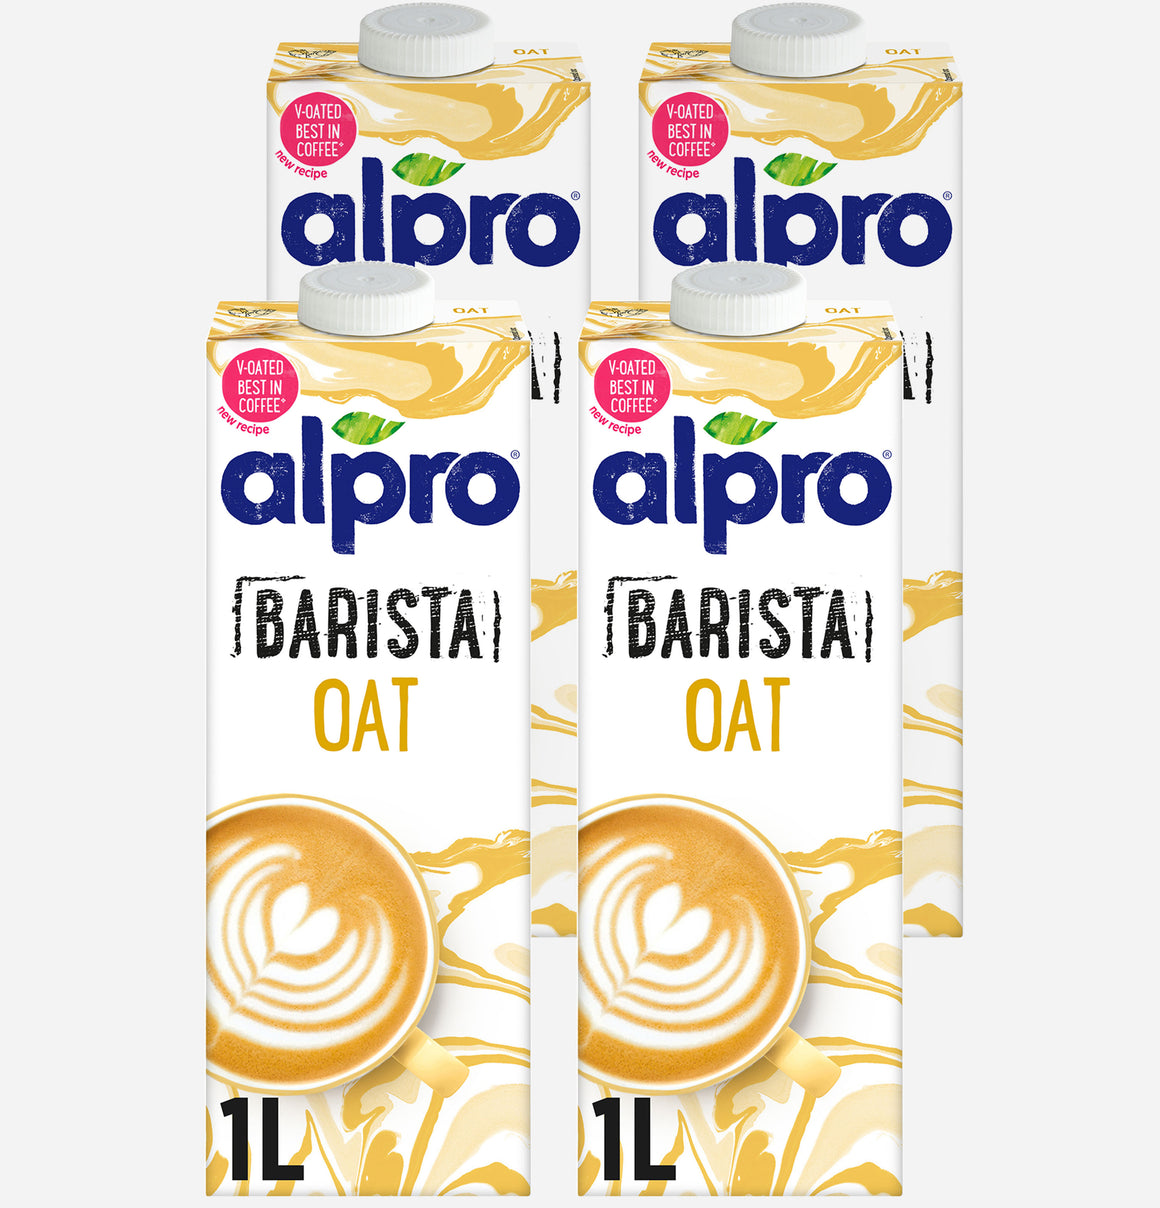 Alpro Barista Oat Drink 1L, (Pack of 4),New Recipe, Voted Best in Coffee, 100% Plant Based And Dairy Free, Suitable For Vegans, Naturally Free From Lactose, Rich In Nutrients